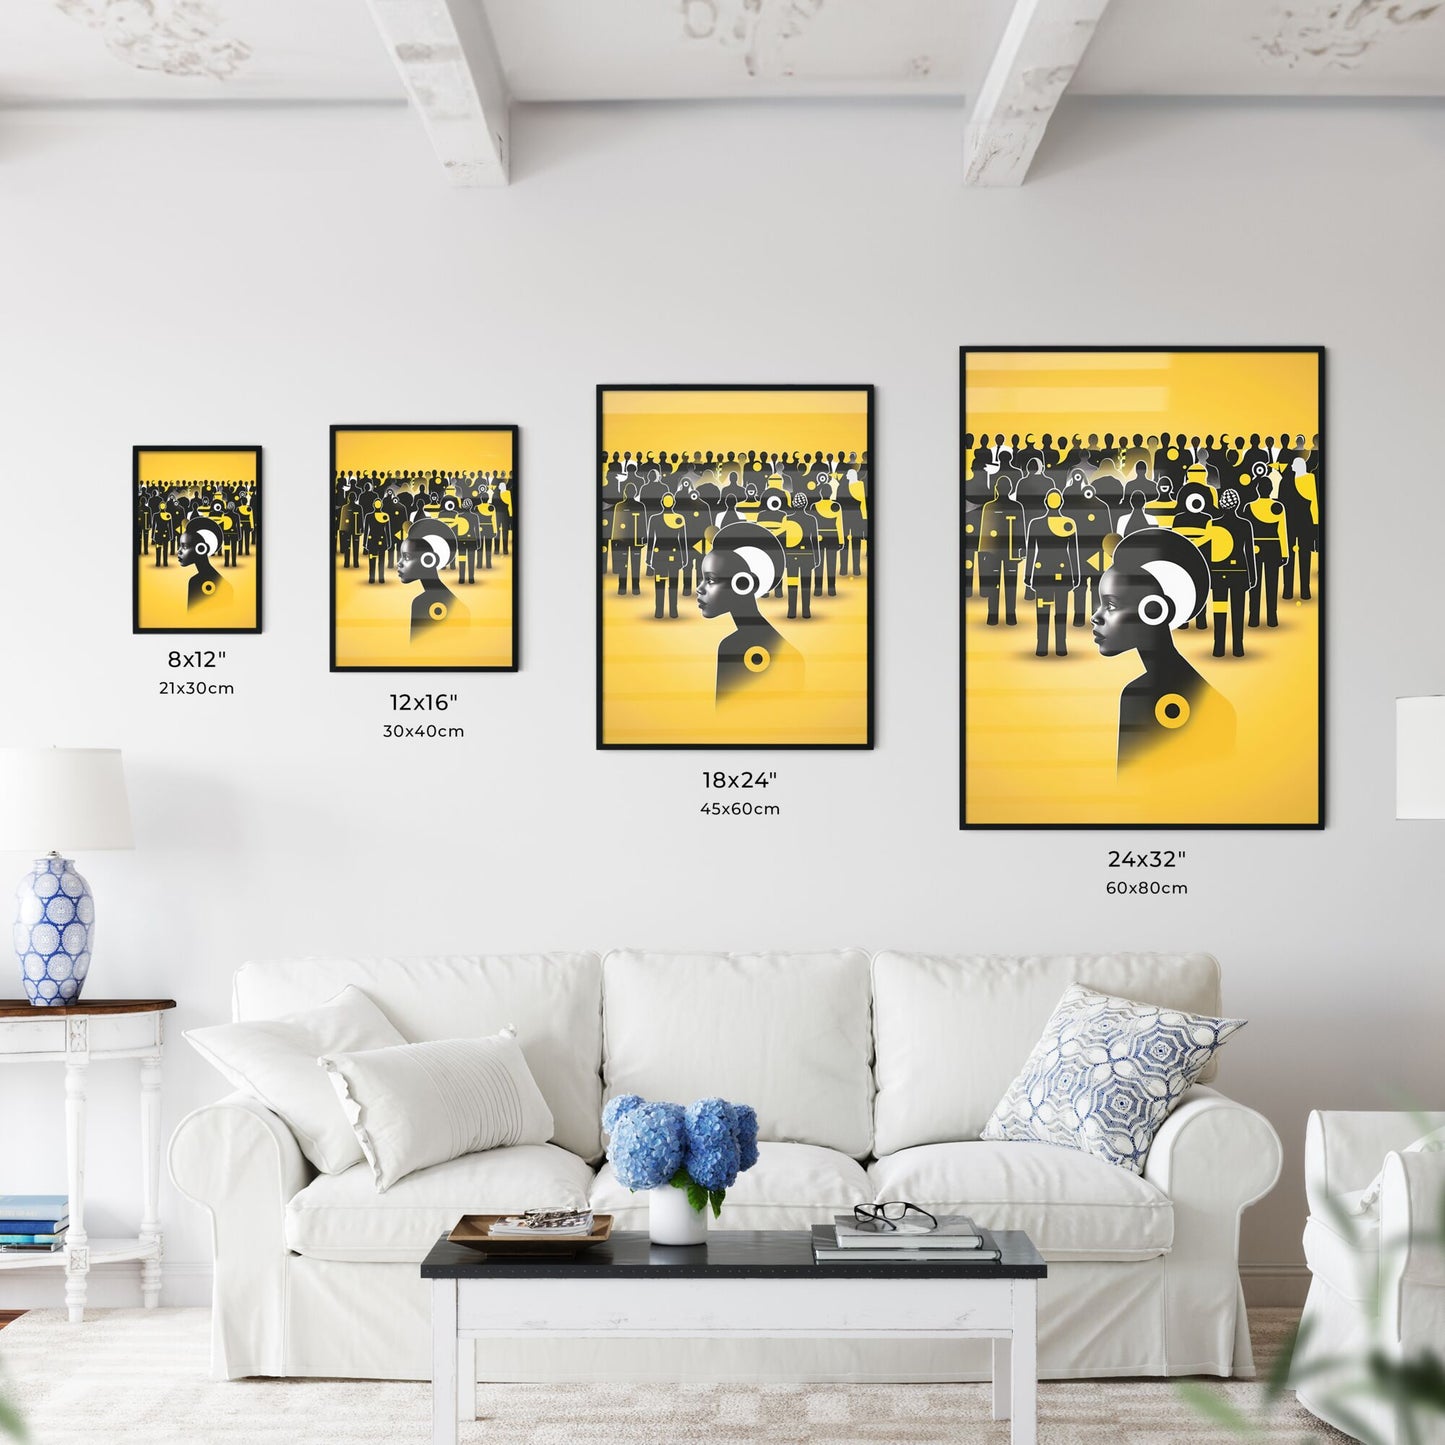 Vibrant Art Depicting Election Season with Social Media and Political Figures in a Yellow Room, Featuring Primitive Shapes and Black and White Accents Default Title